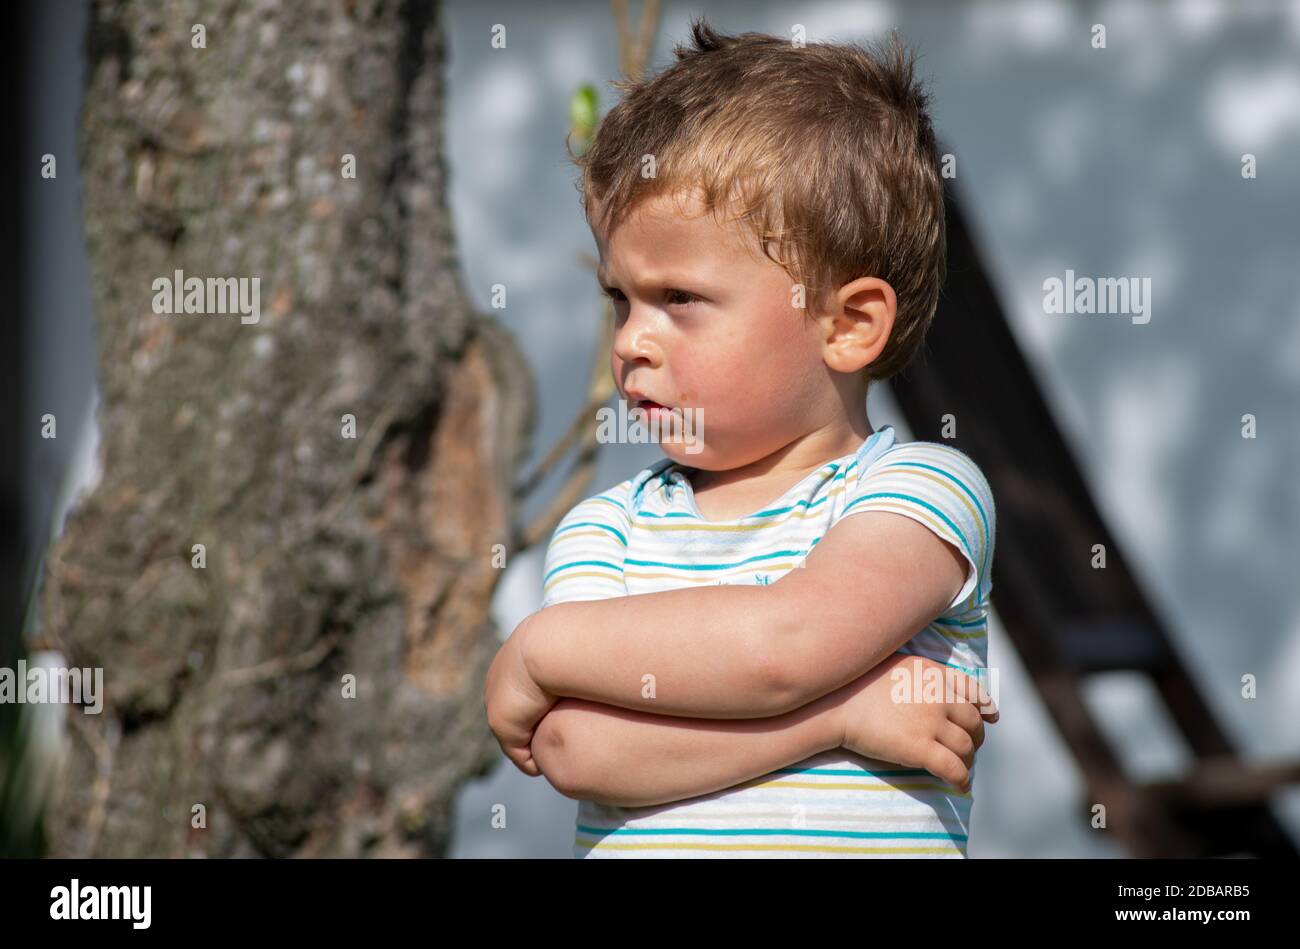 portrait of a child three years old, outdoors Stock Photo